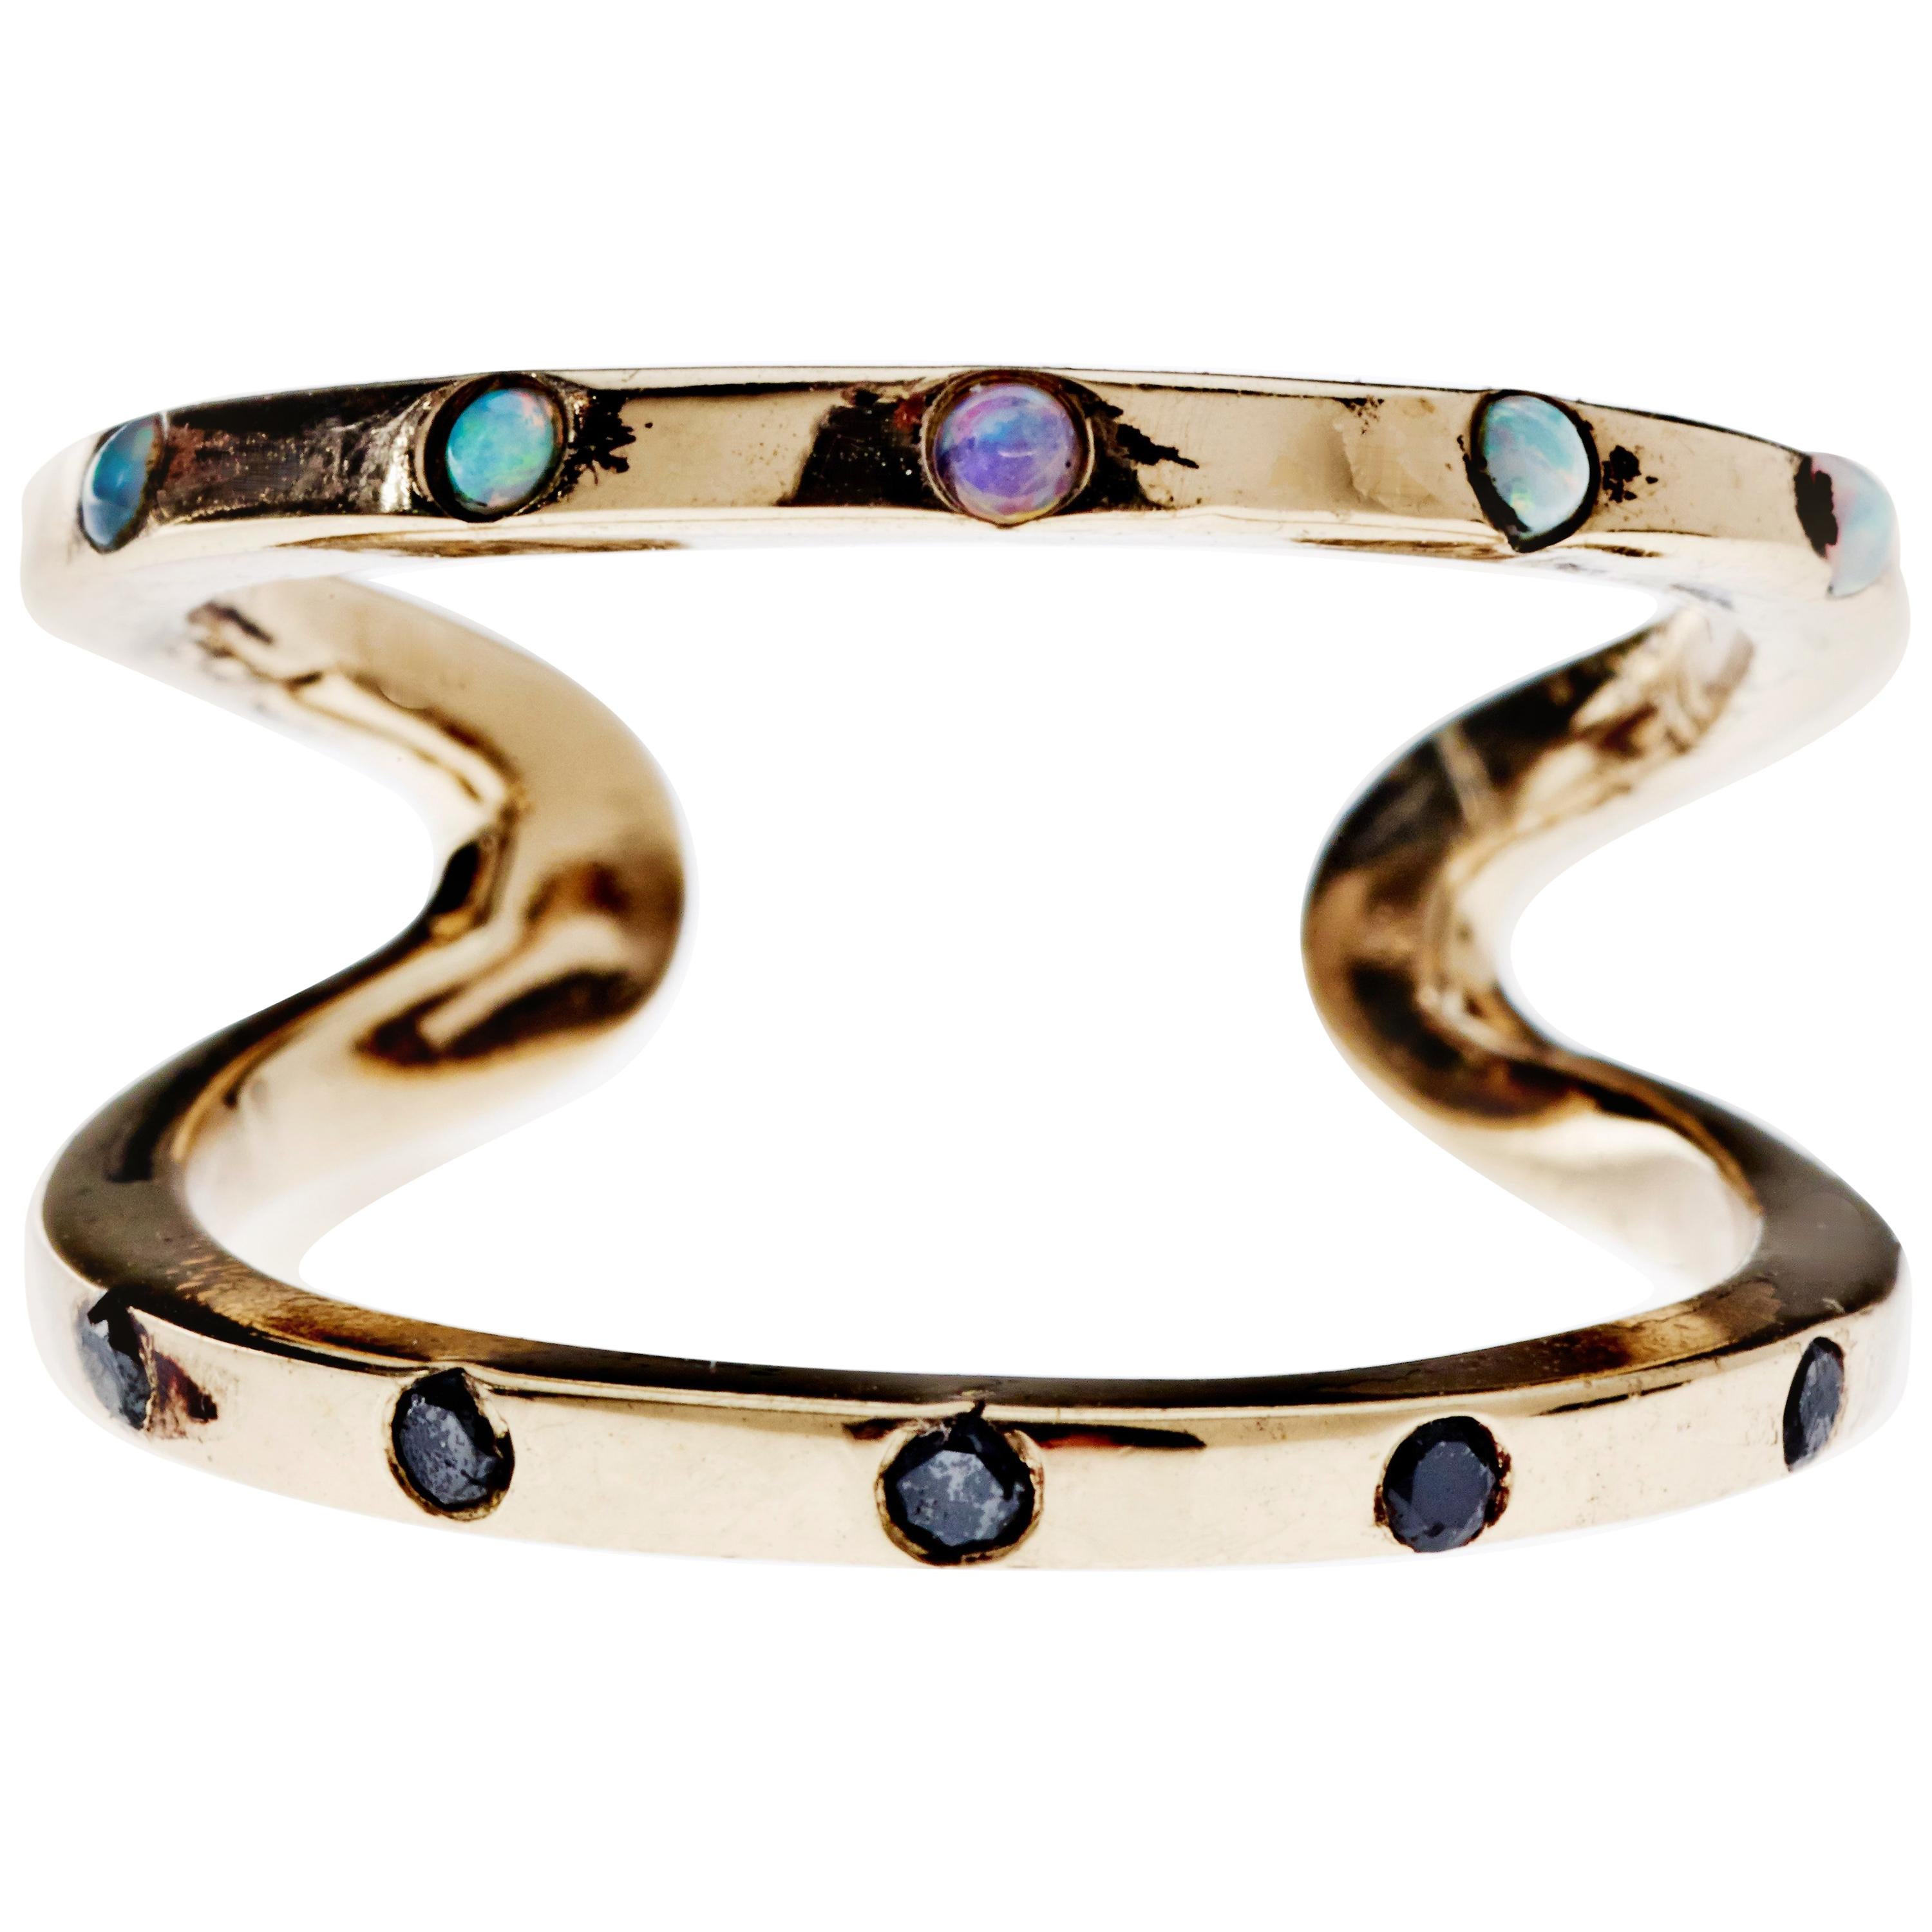 Black Diamond Opal Double Band Ring Gold Cocktail Ring J Dauphin

J DAUPHIN 